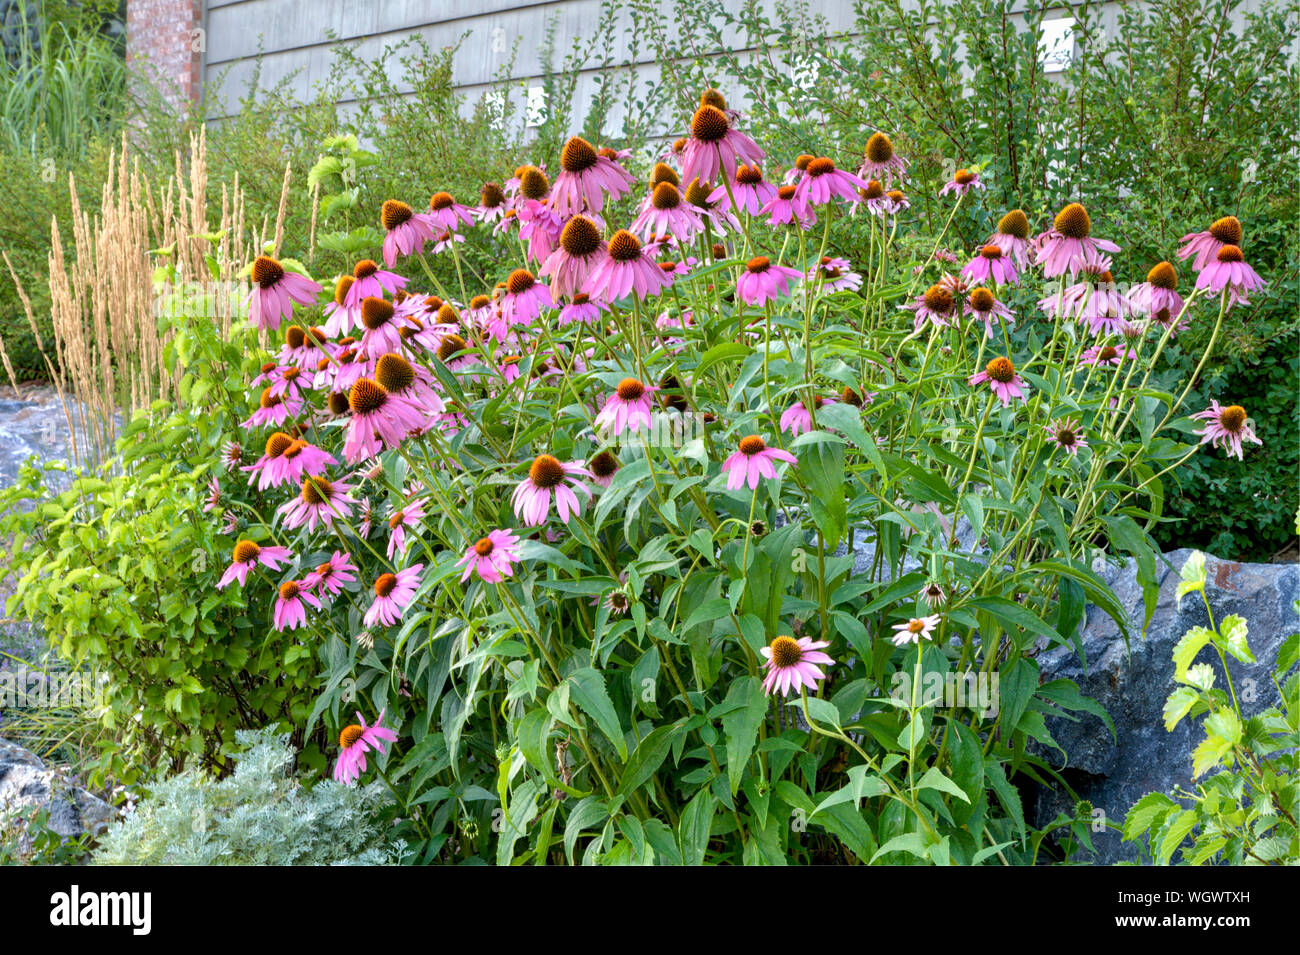 The entire plant of Purple Coneflower at full bloom in a garden setting radiates its beauty in late afternoon soft light. Stock Photo